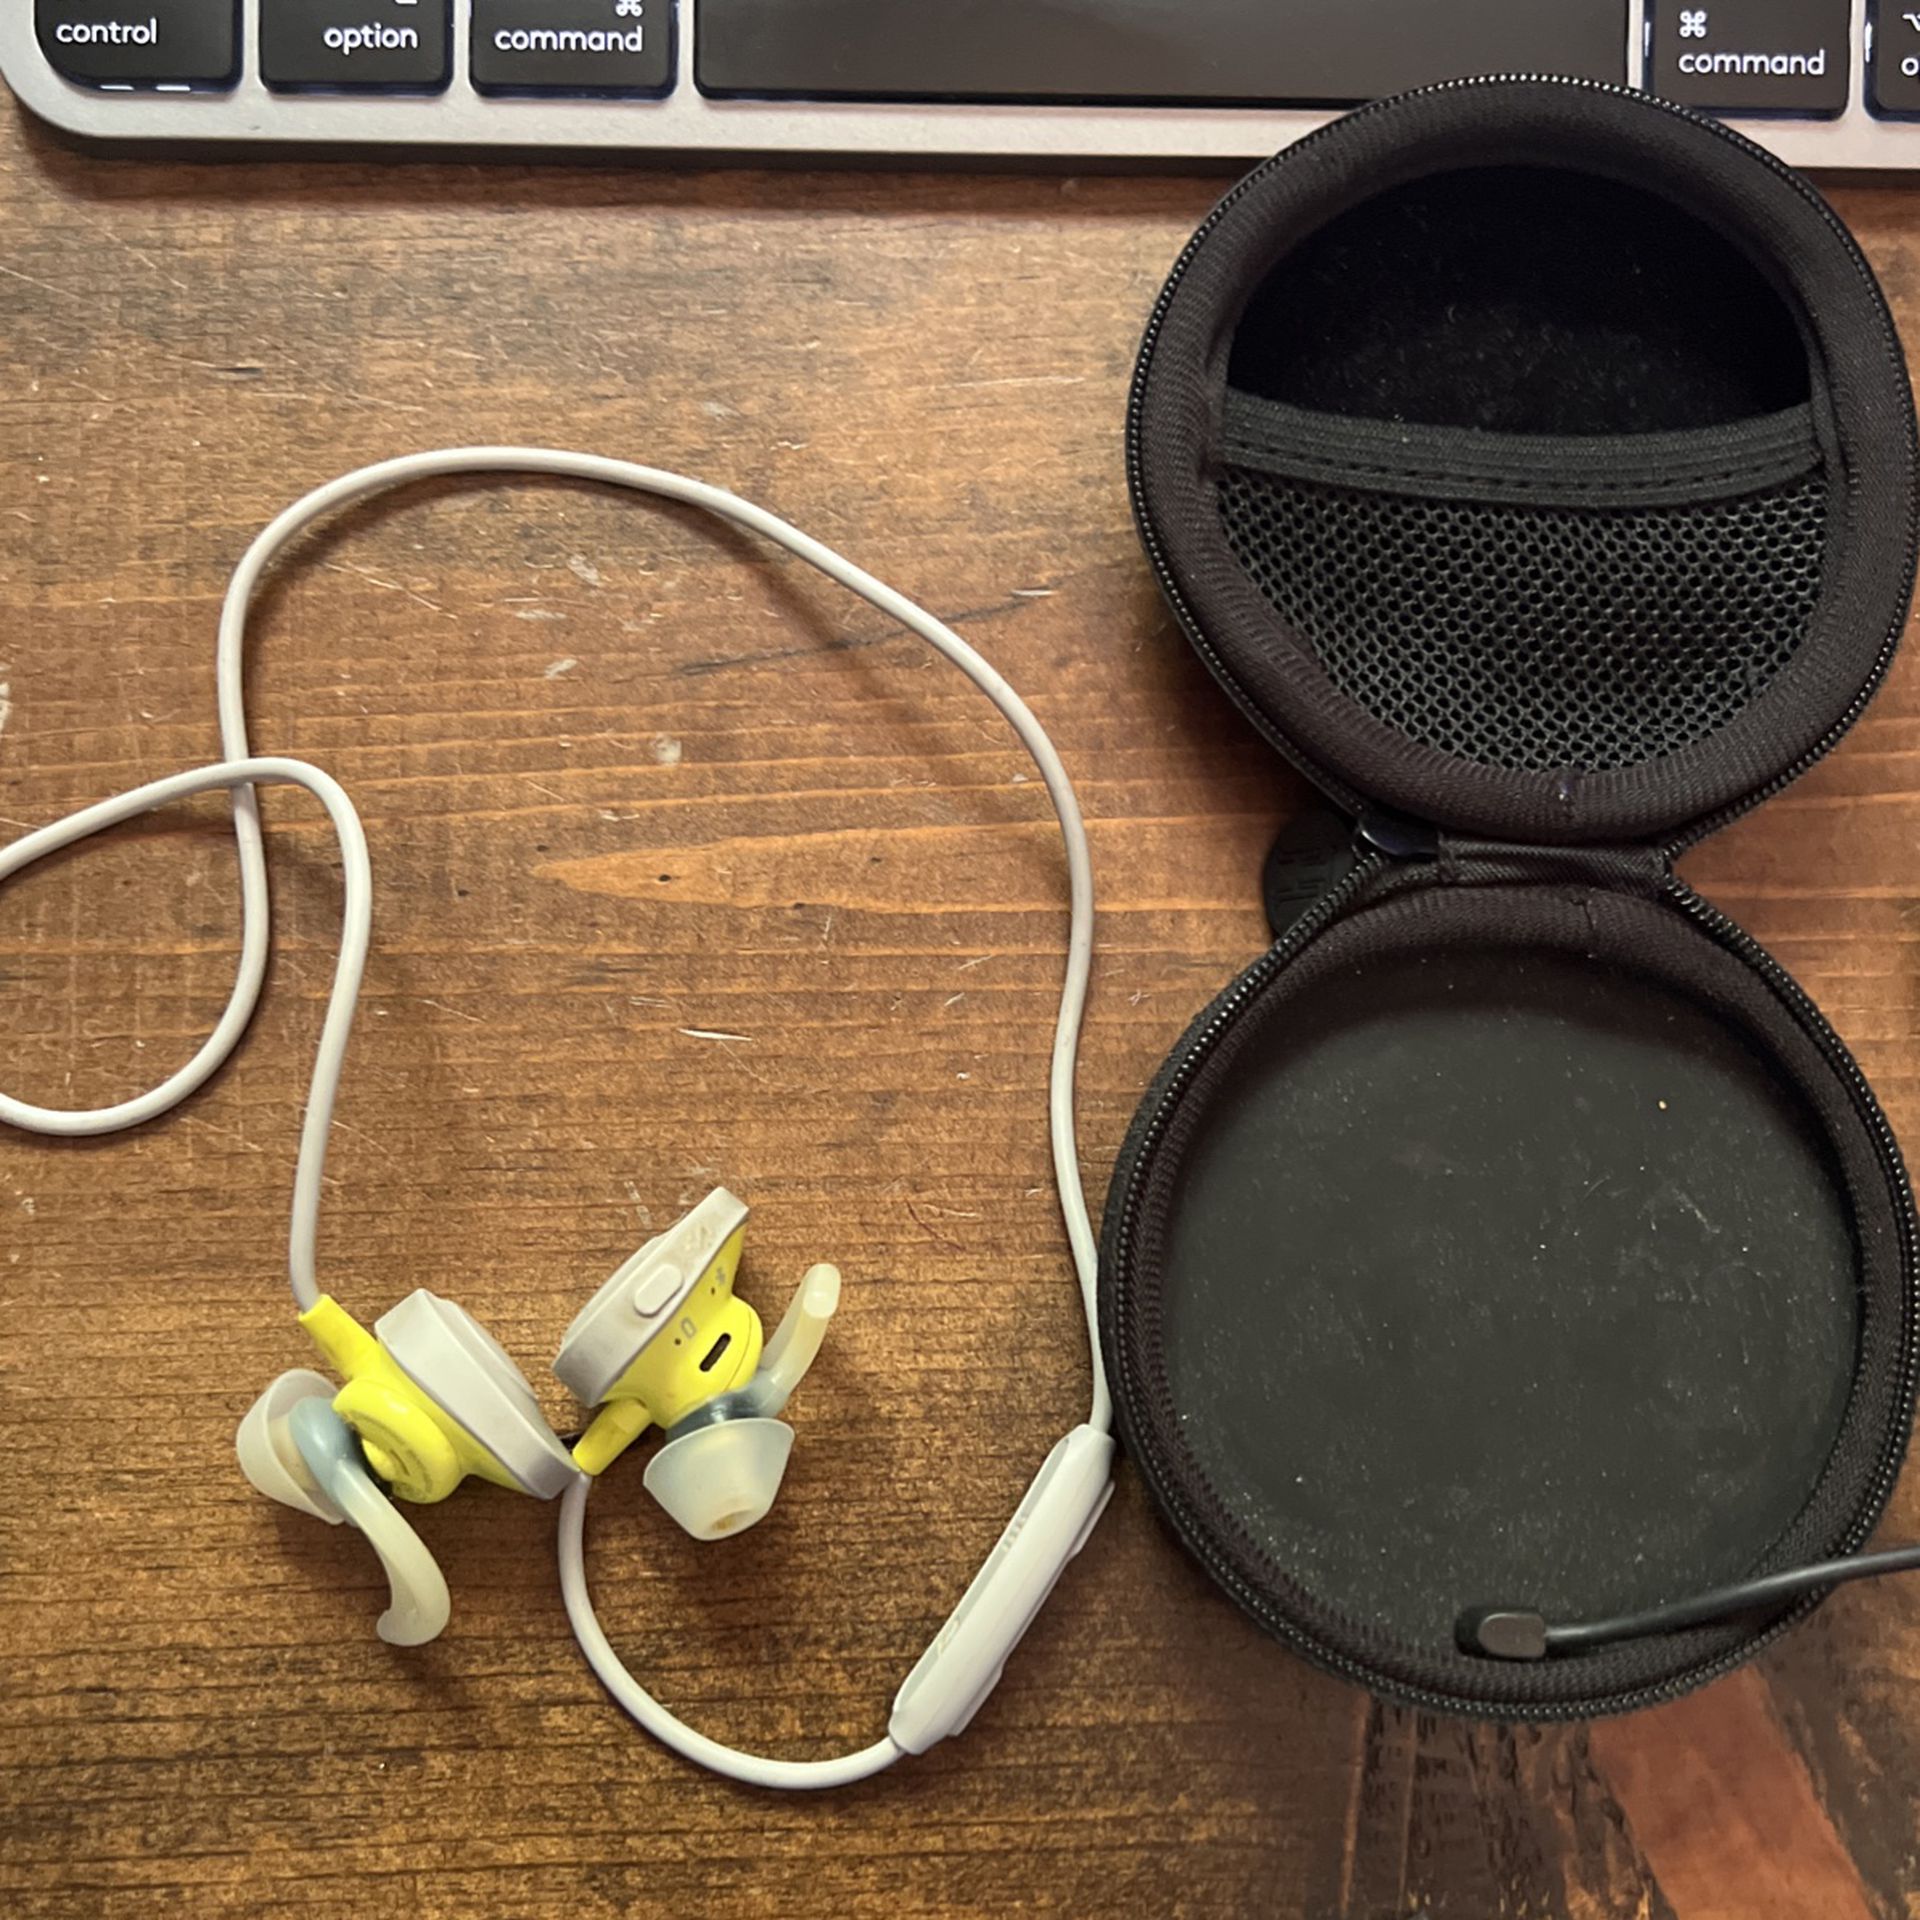 Bose running headphones and charging case